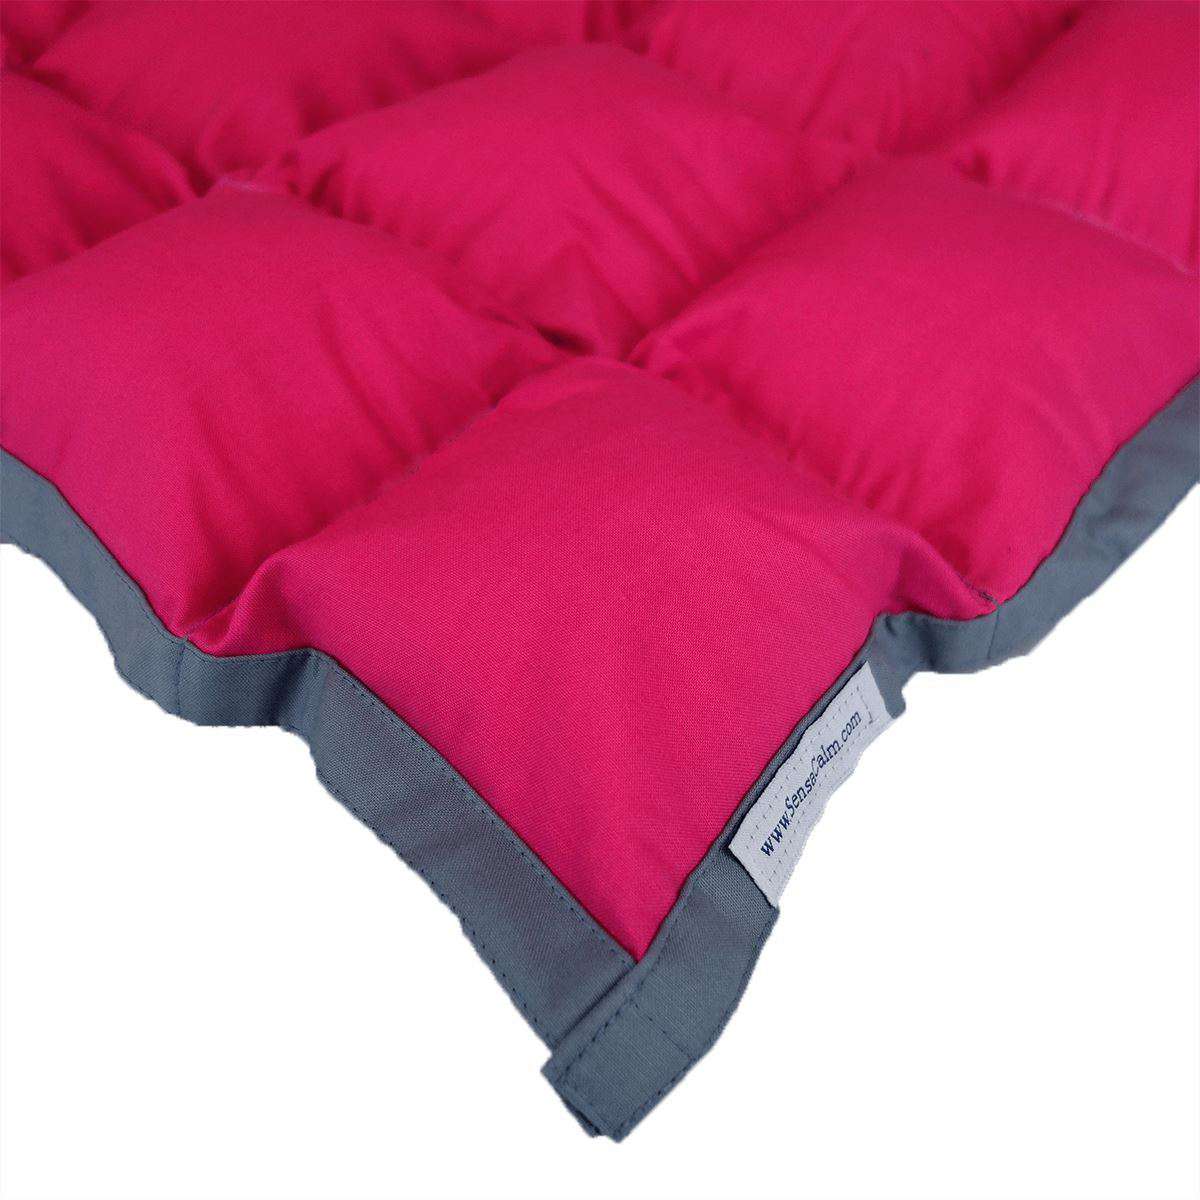 SensaCalm Clearance Waterproof Weighted Blanket - Small Raspberry and Slate Gray MULTIPLES AVAILABLE Clearance Weighted Blanket